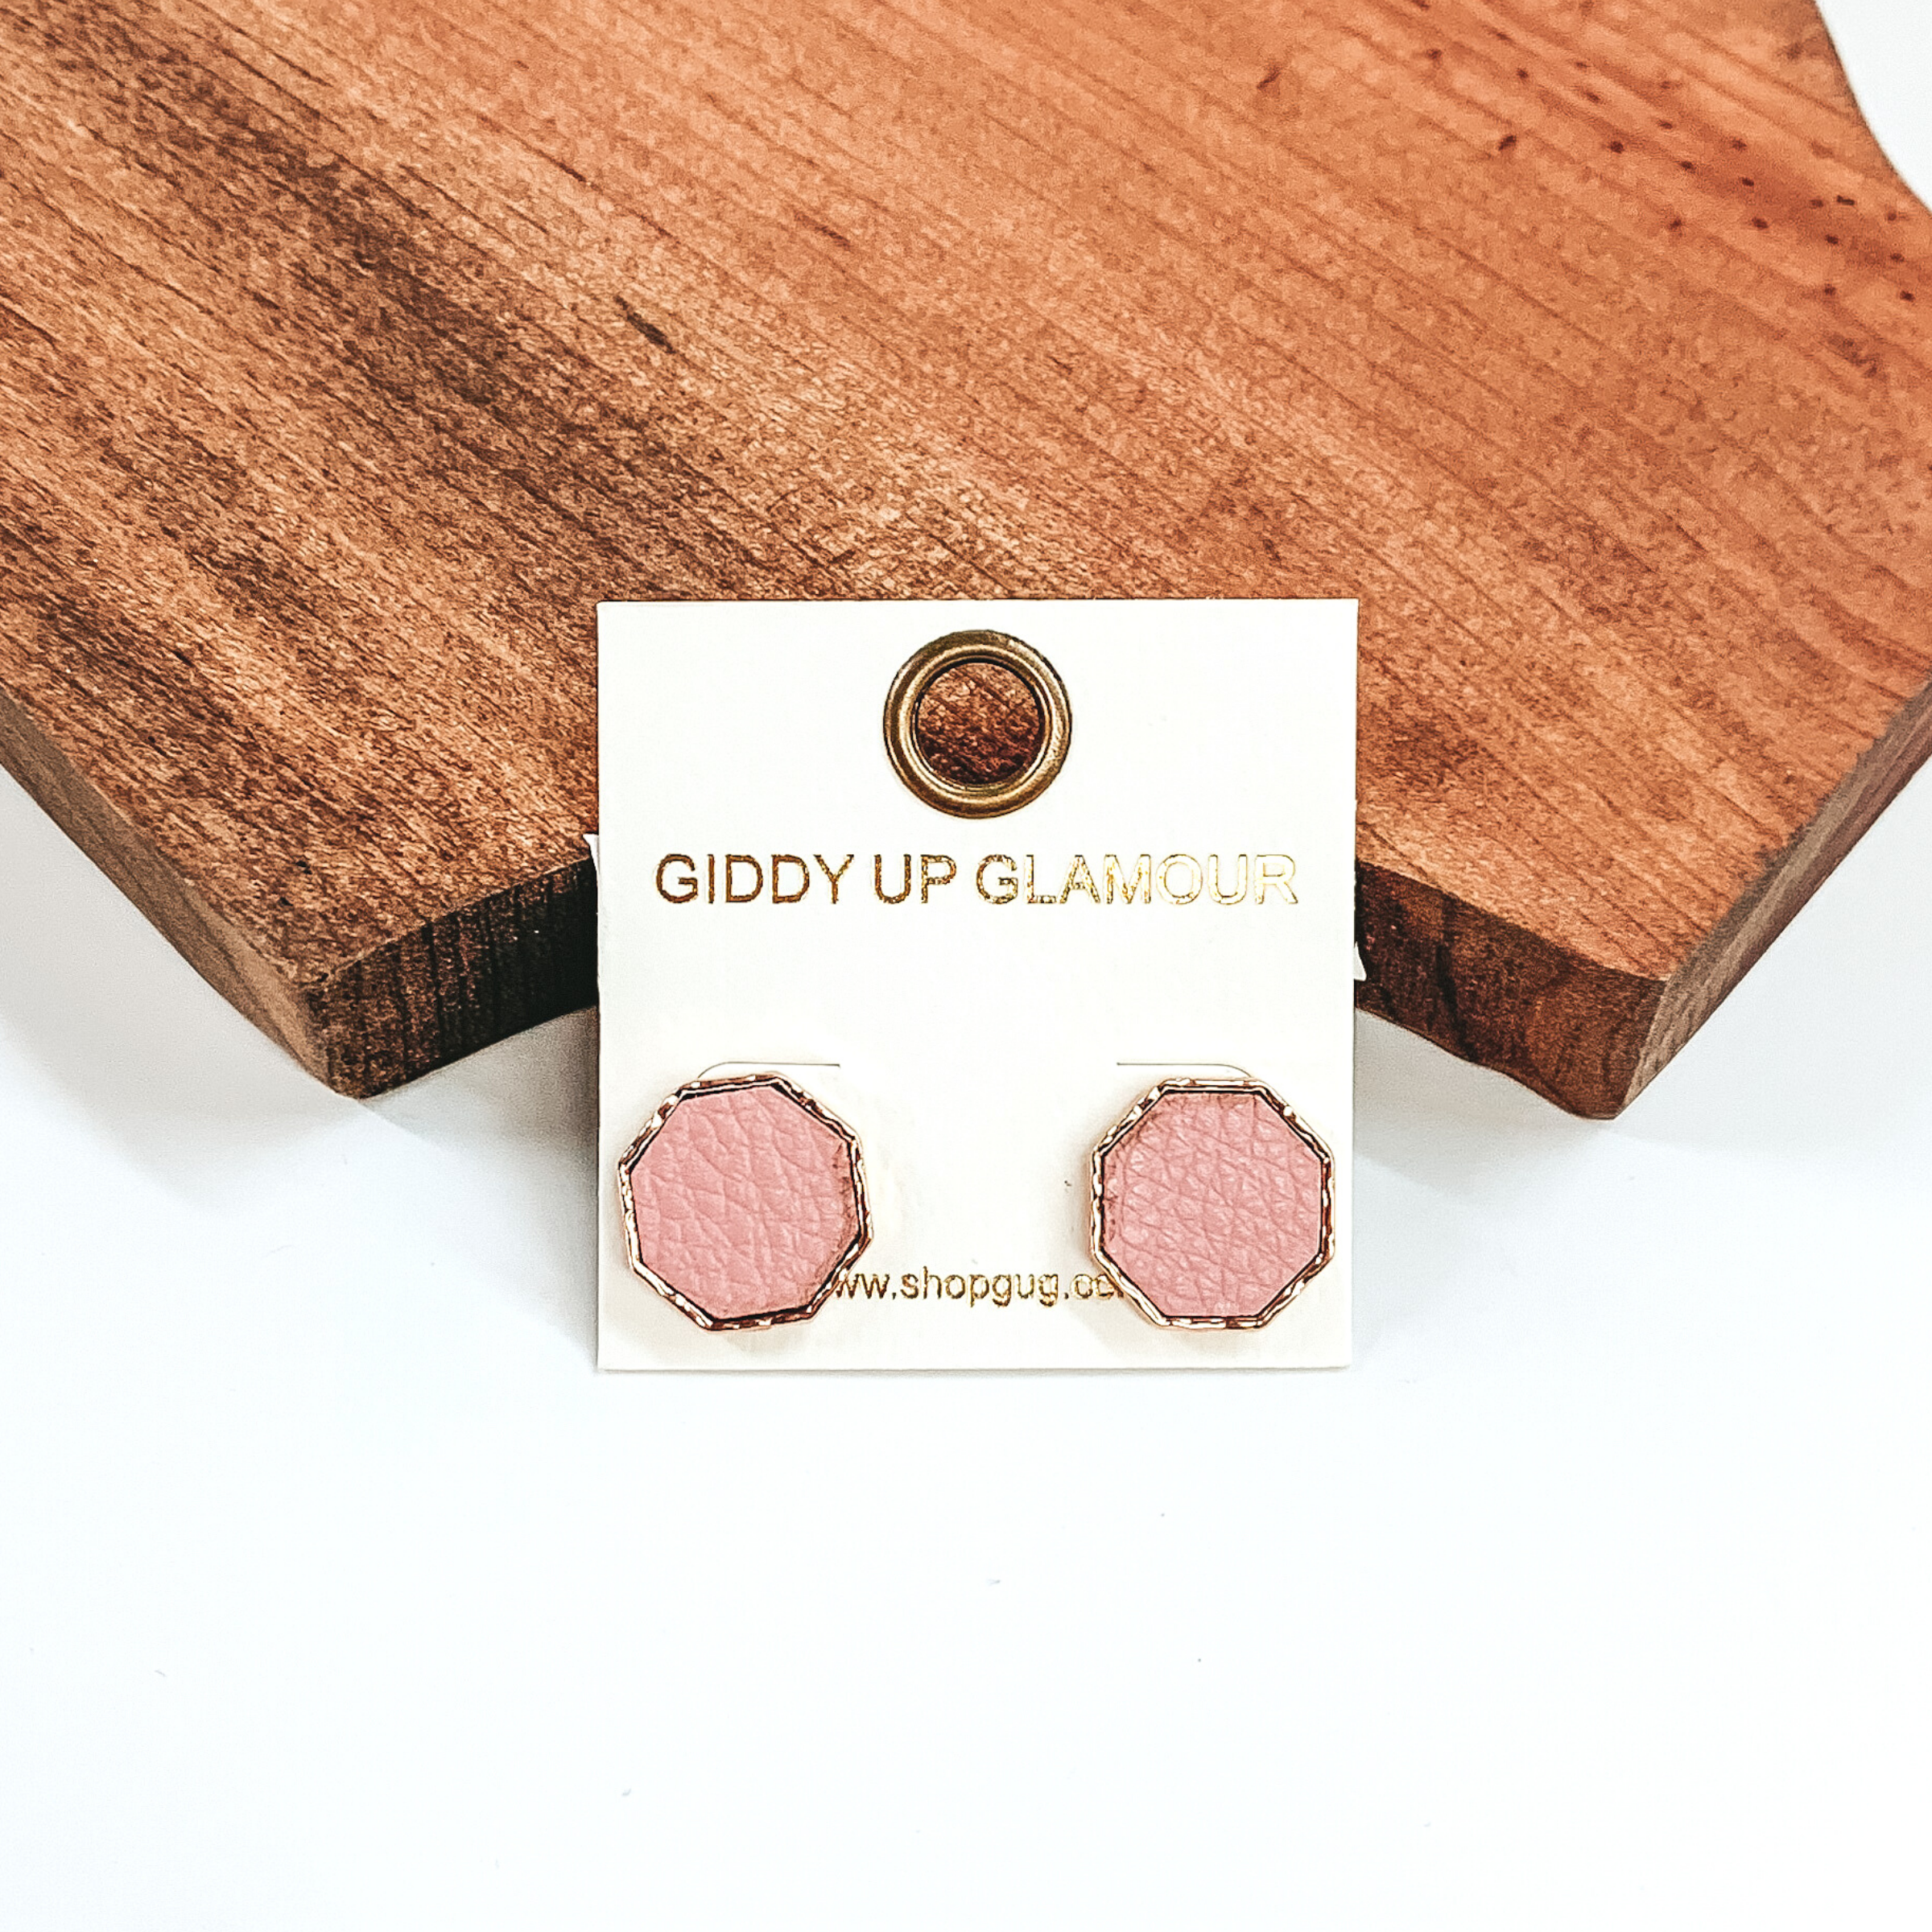 Gold, hexagon stud earrings with a pale pink leather like inlay. Pictured on a white background in front of a piece of wood. 